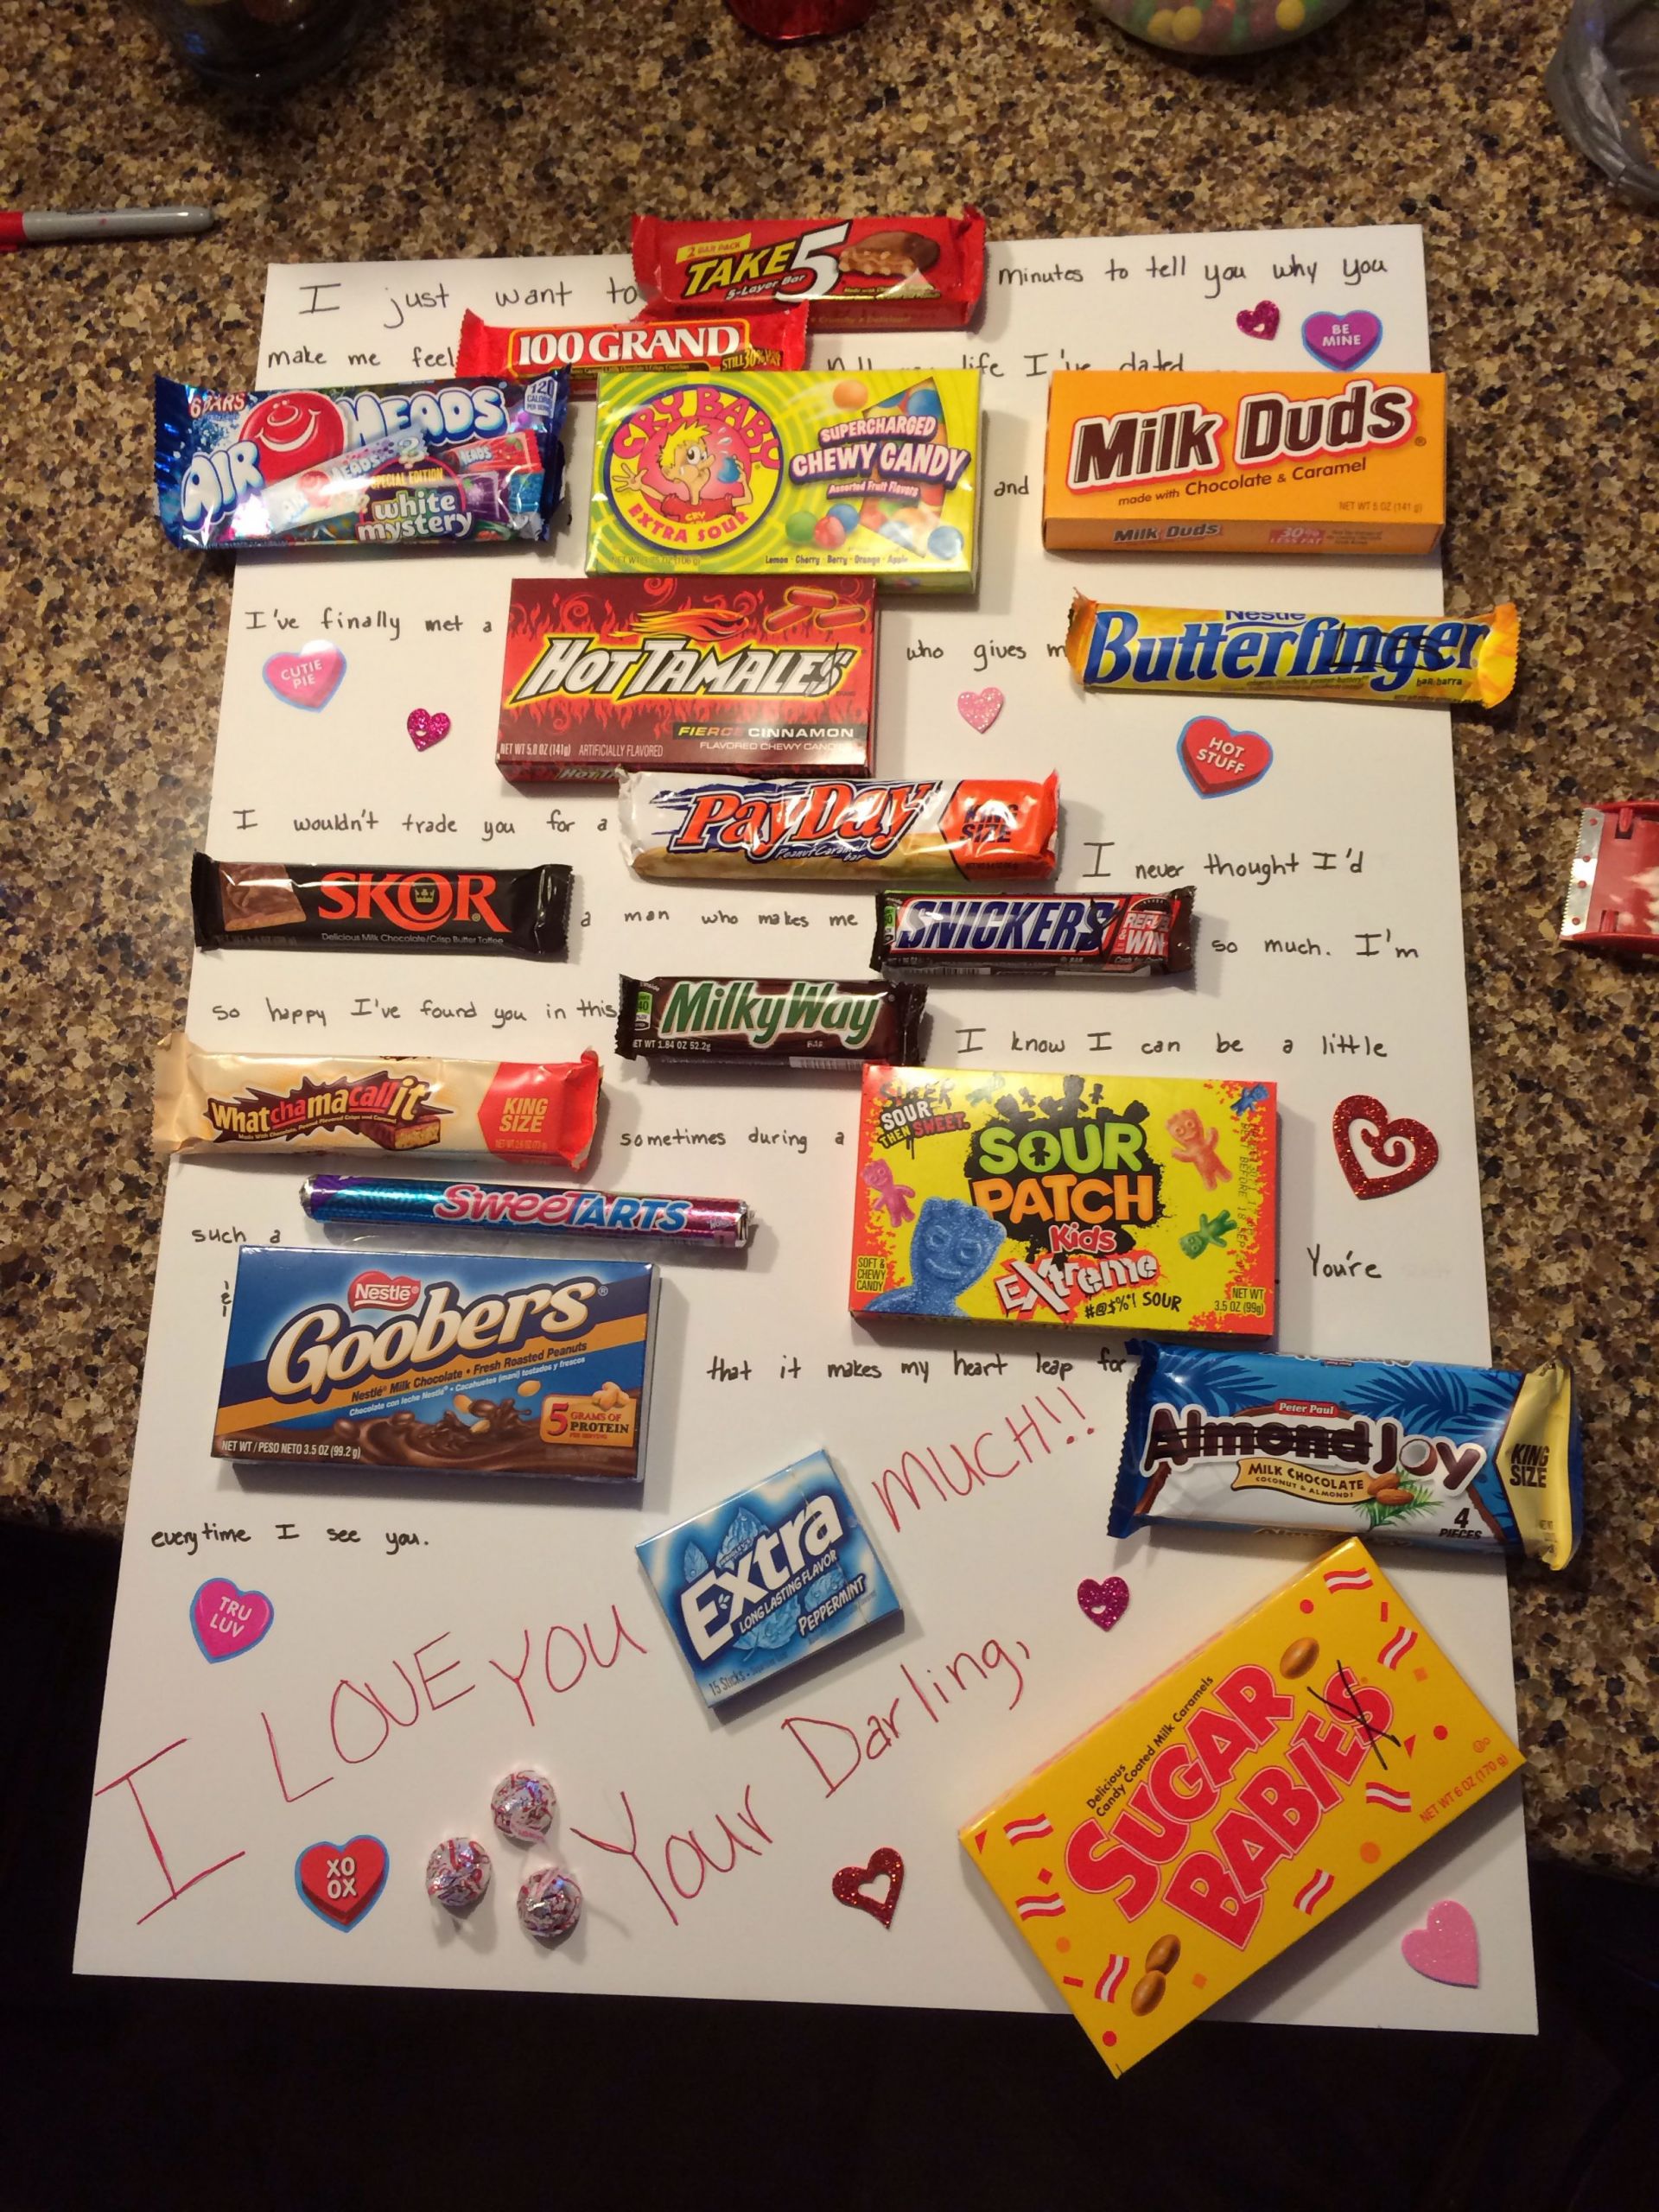 Friend Valentines Day Gift Ideas Awesome A Cute Valentines Day Candy Card My Friend Had the Idea to